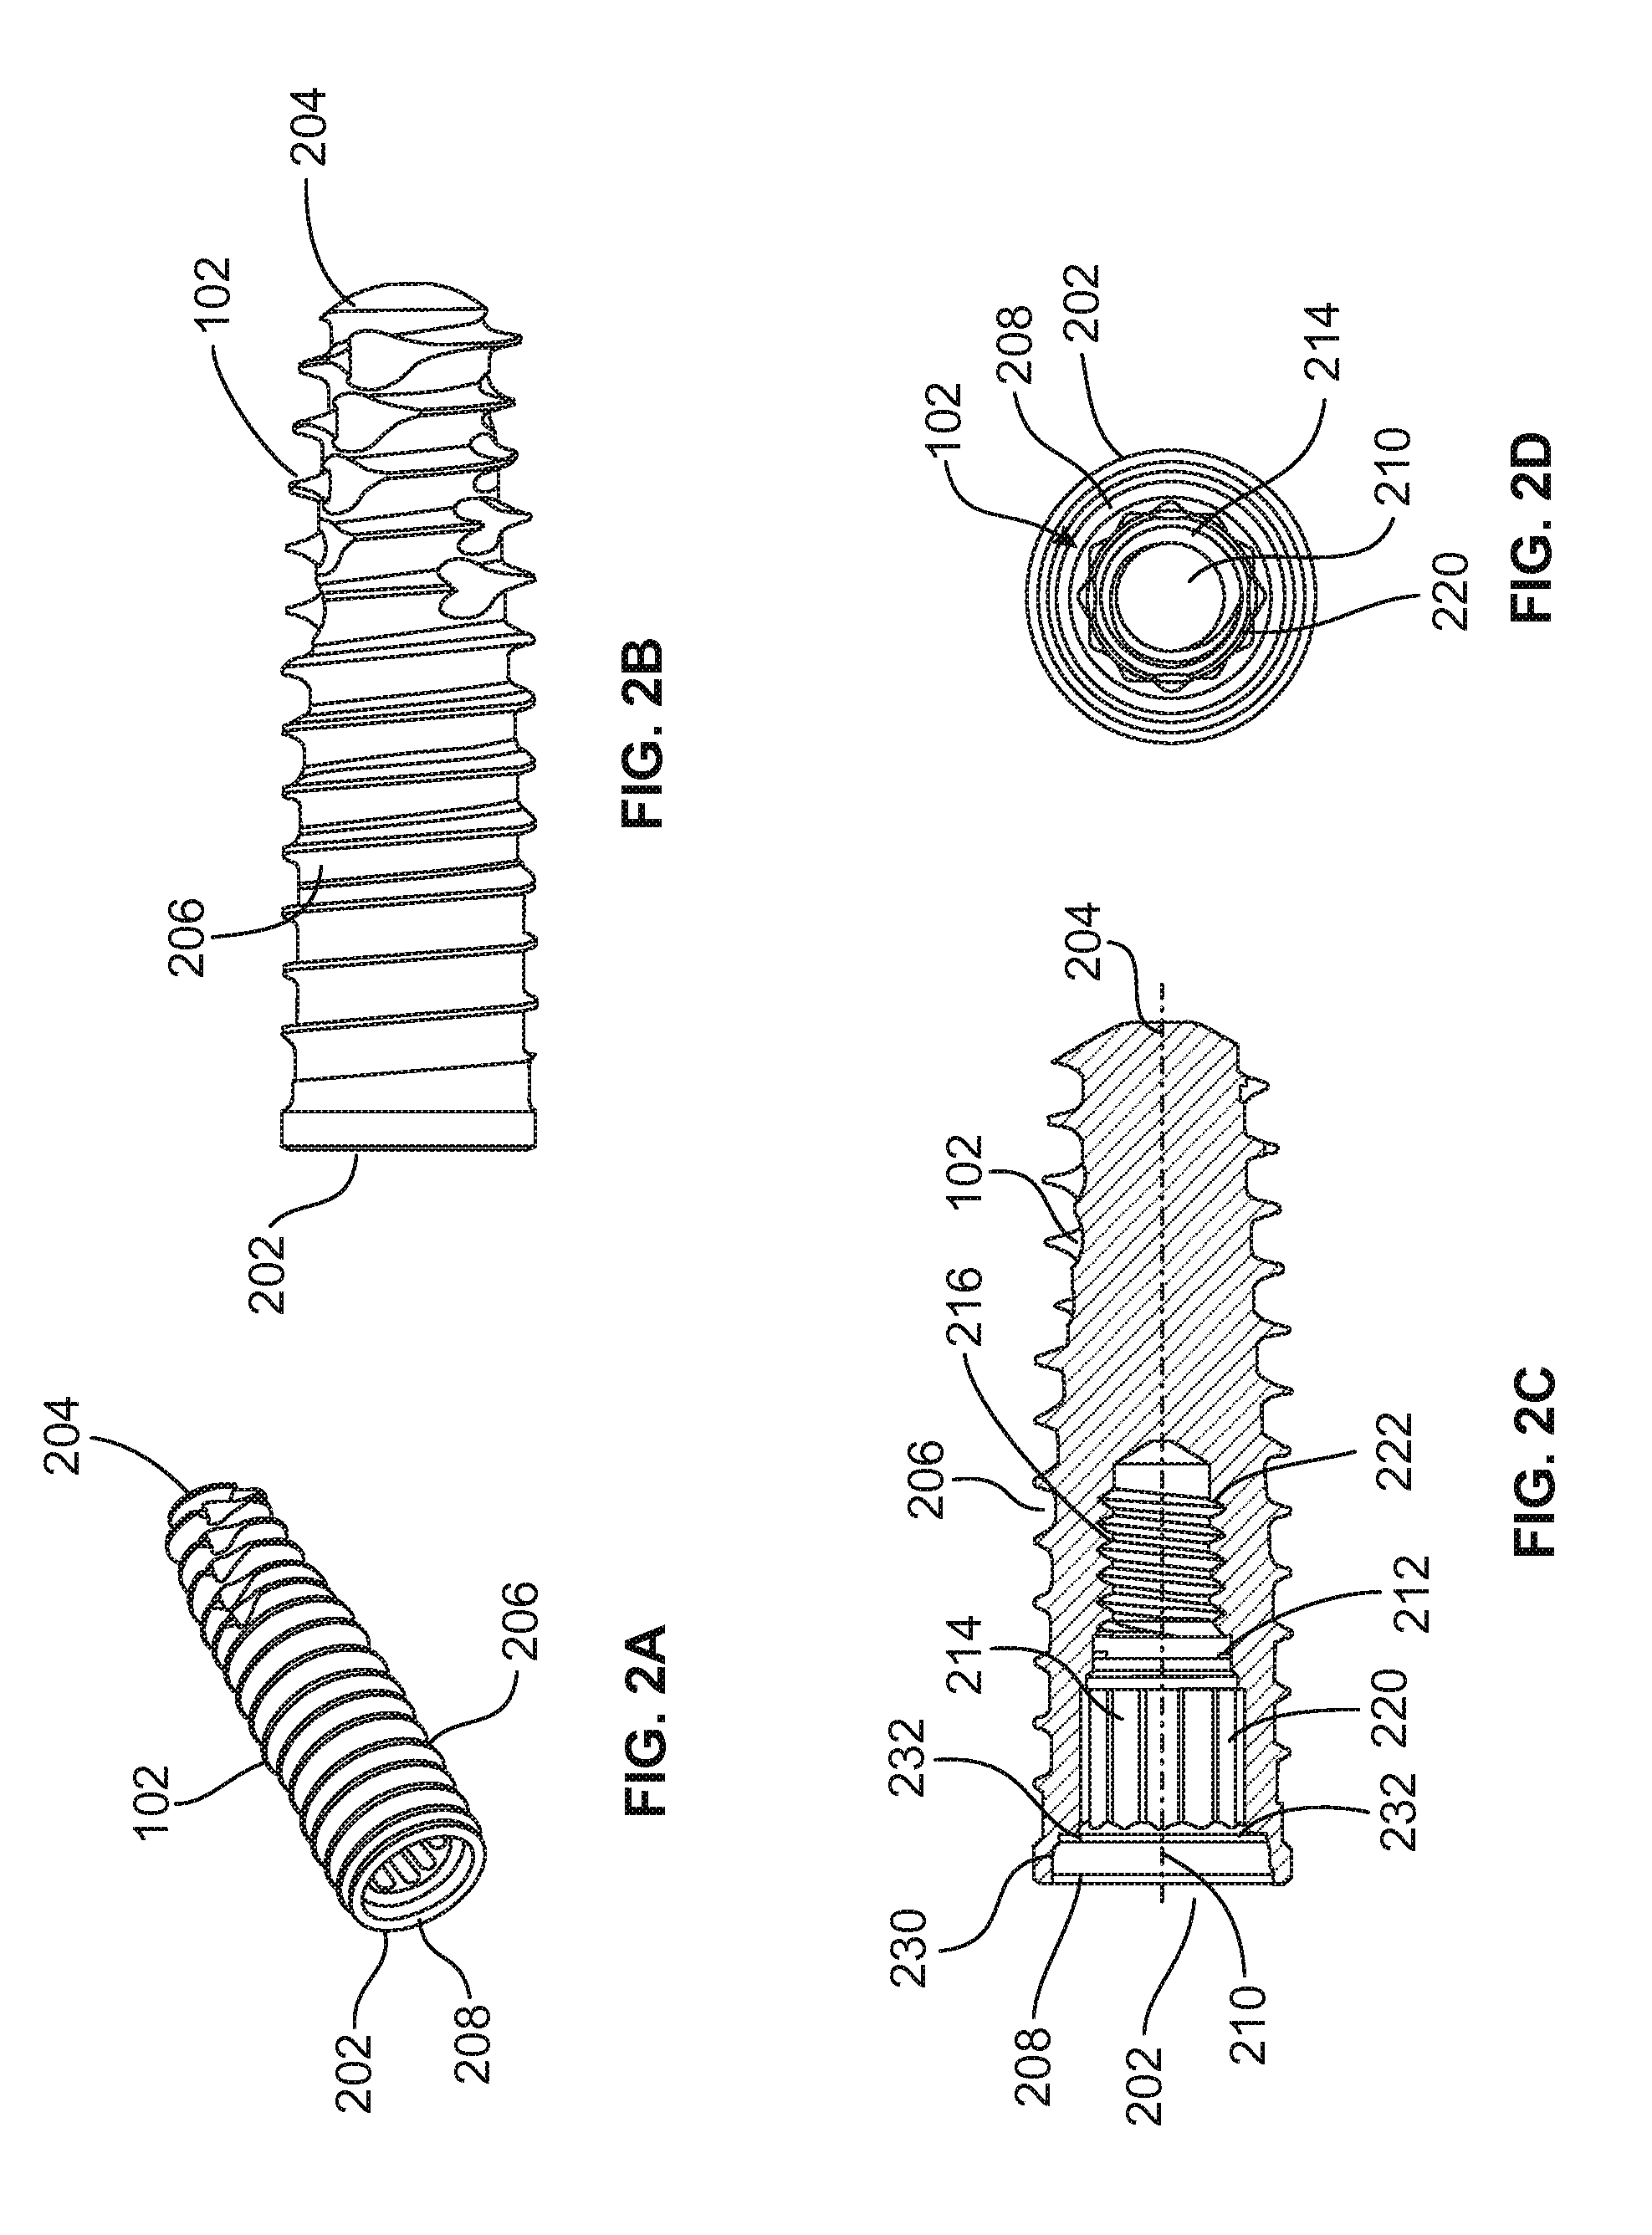 System and Method fo Dental Implant and Interface to Abutment For Restoration